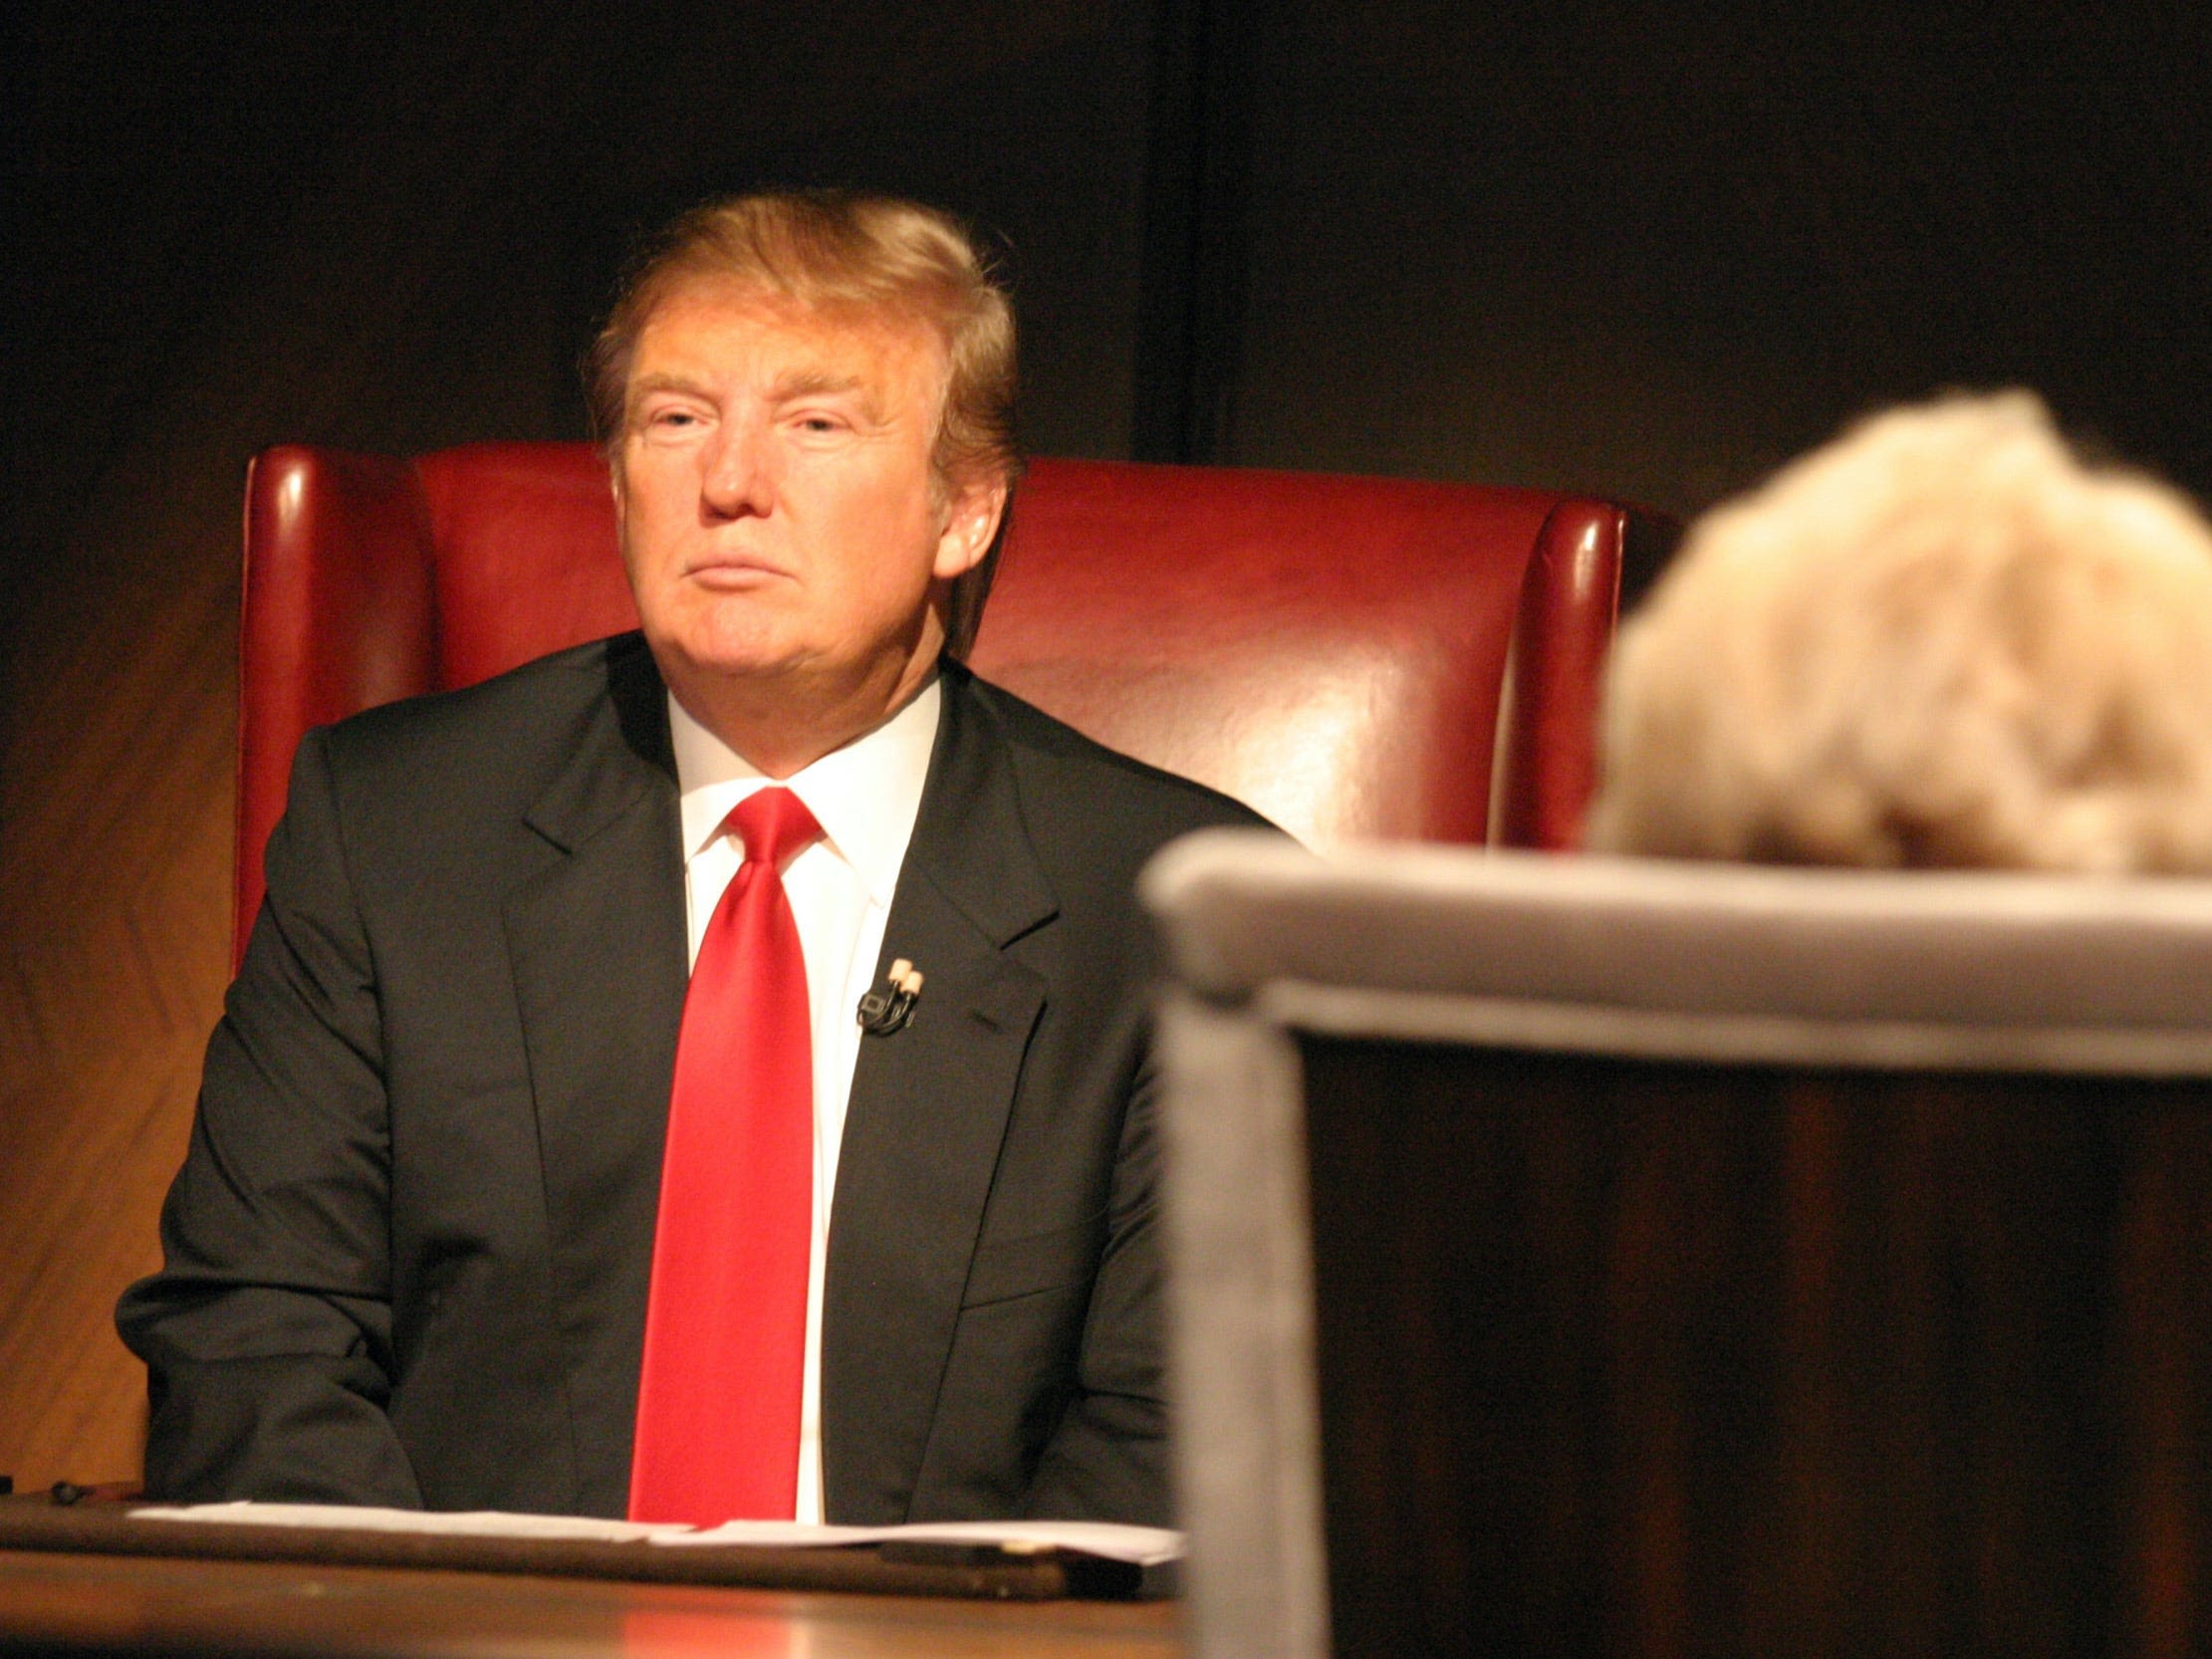 'The Apprentice' producer says Donald Trump used the N-word on set